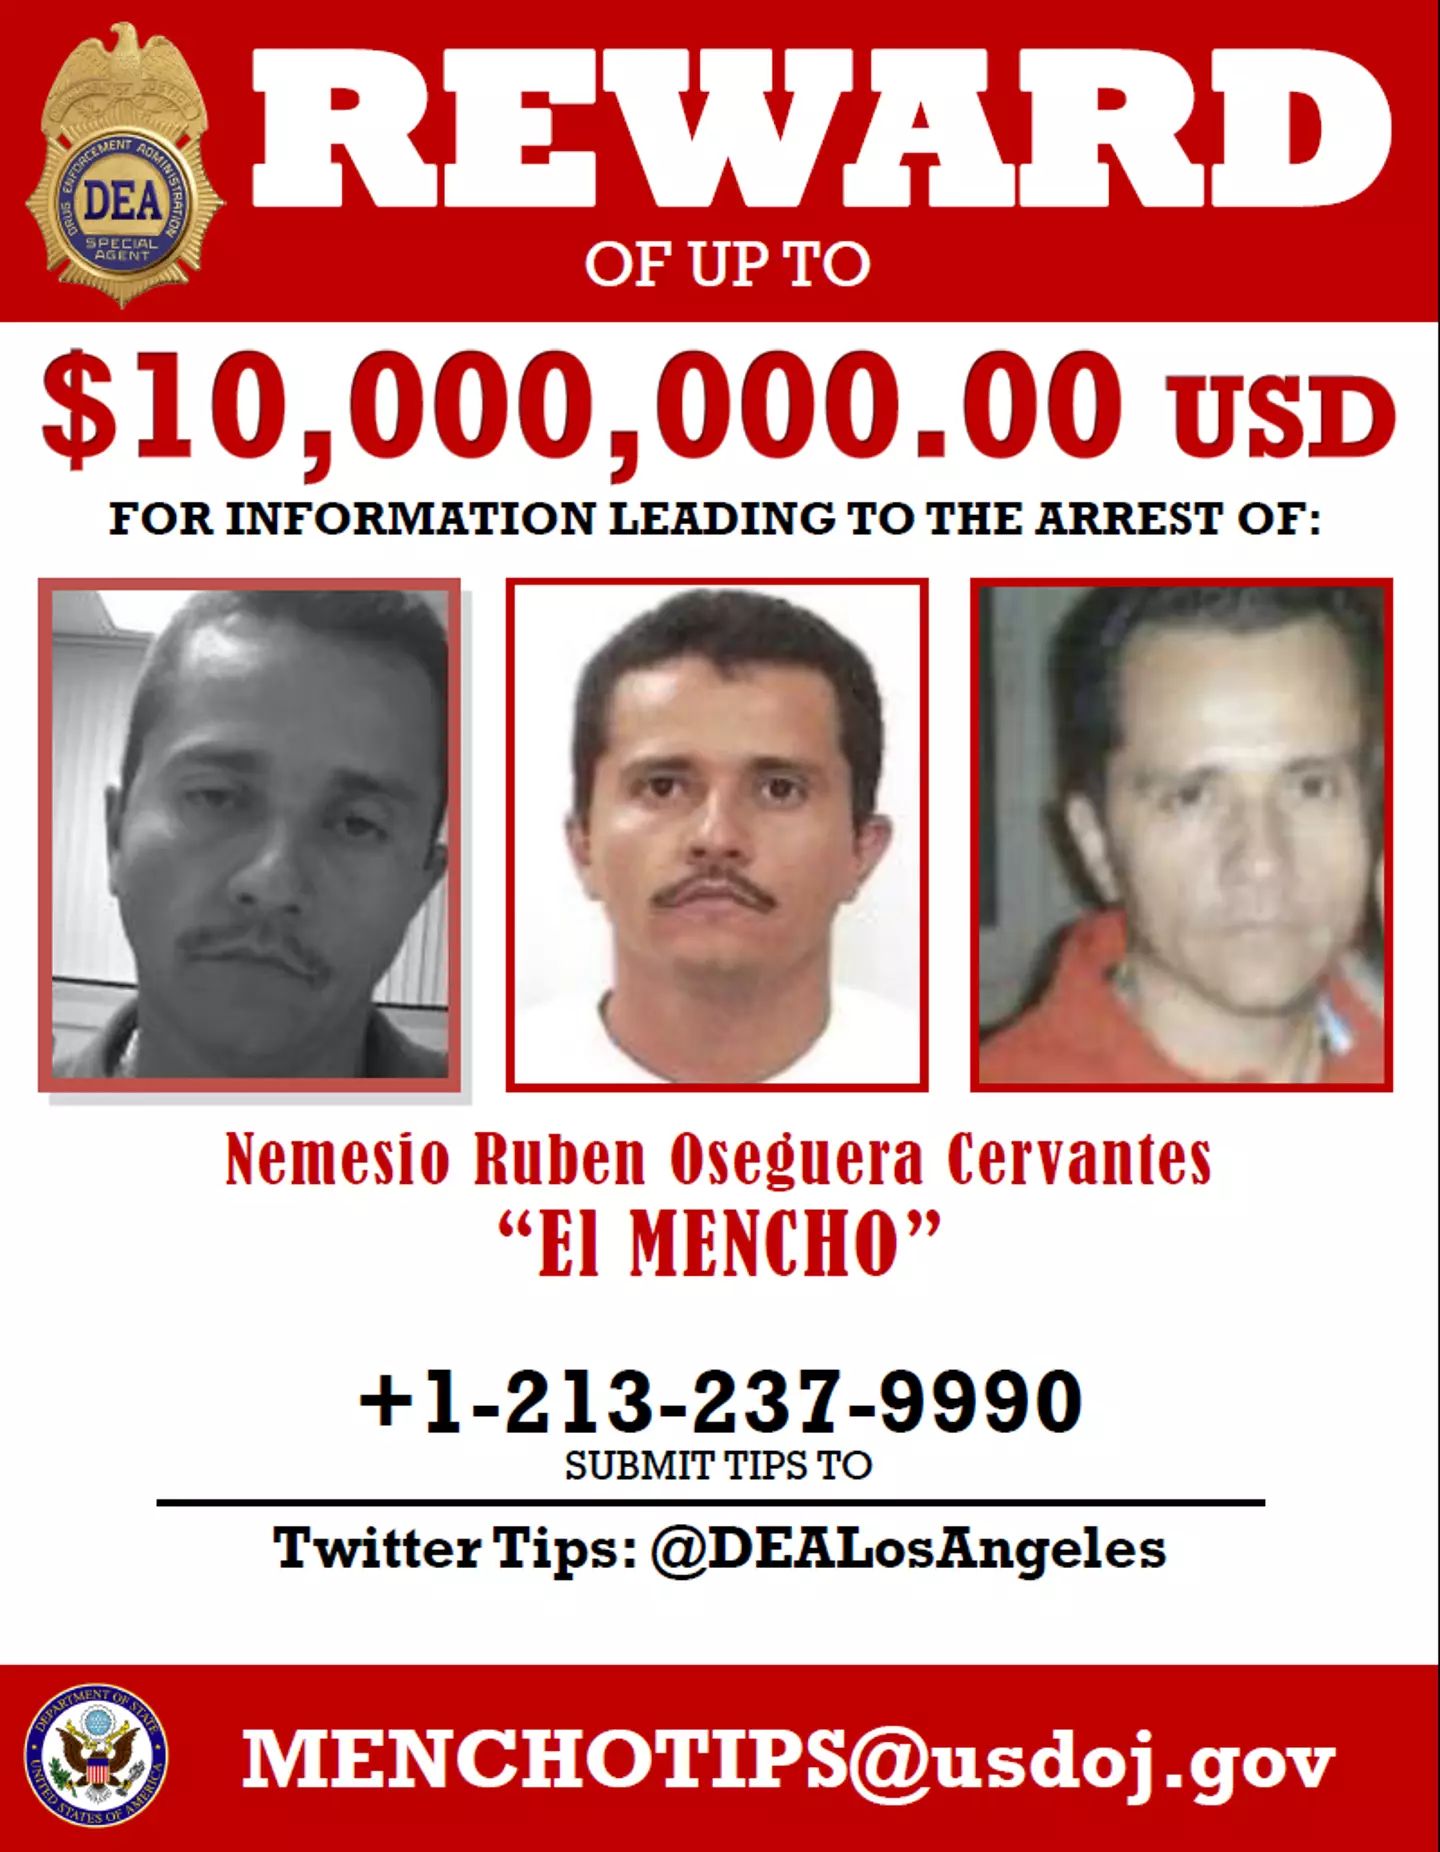 The US government has offered a $10 million reward.